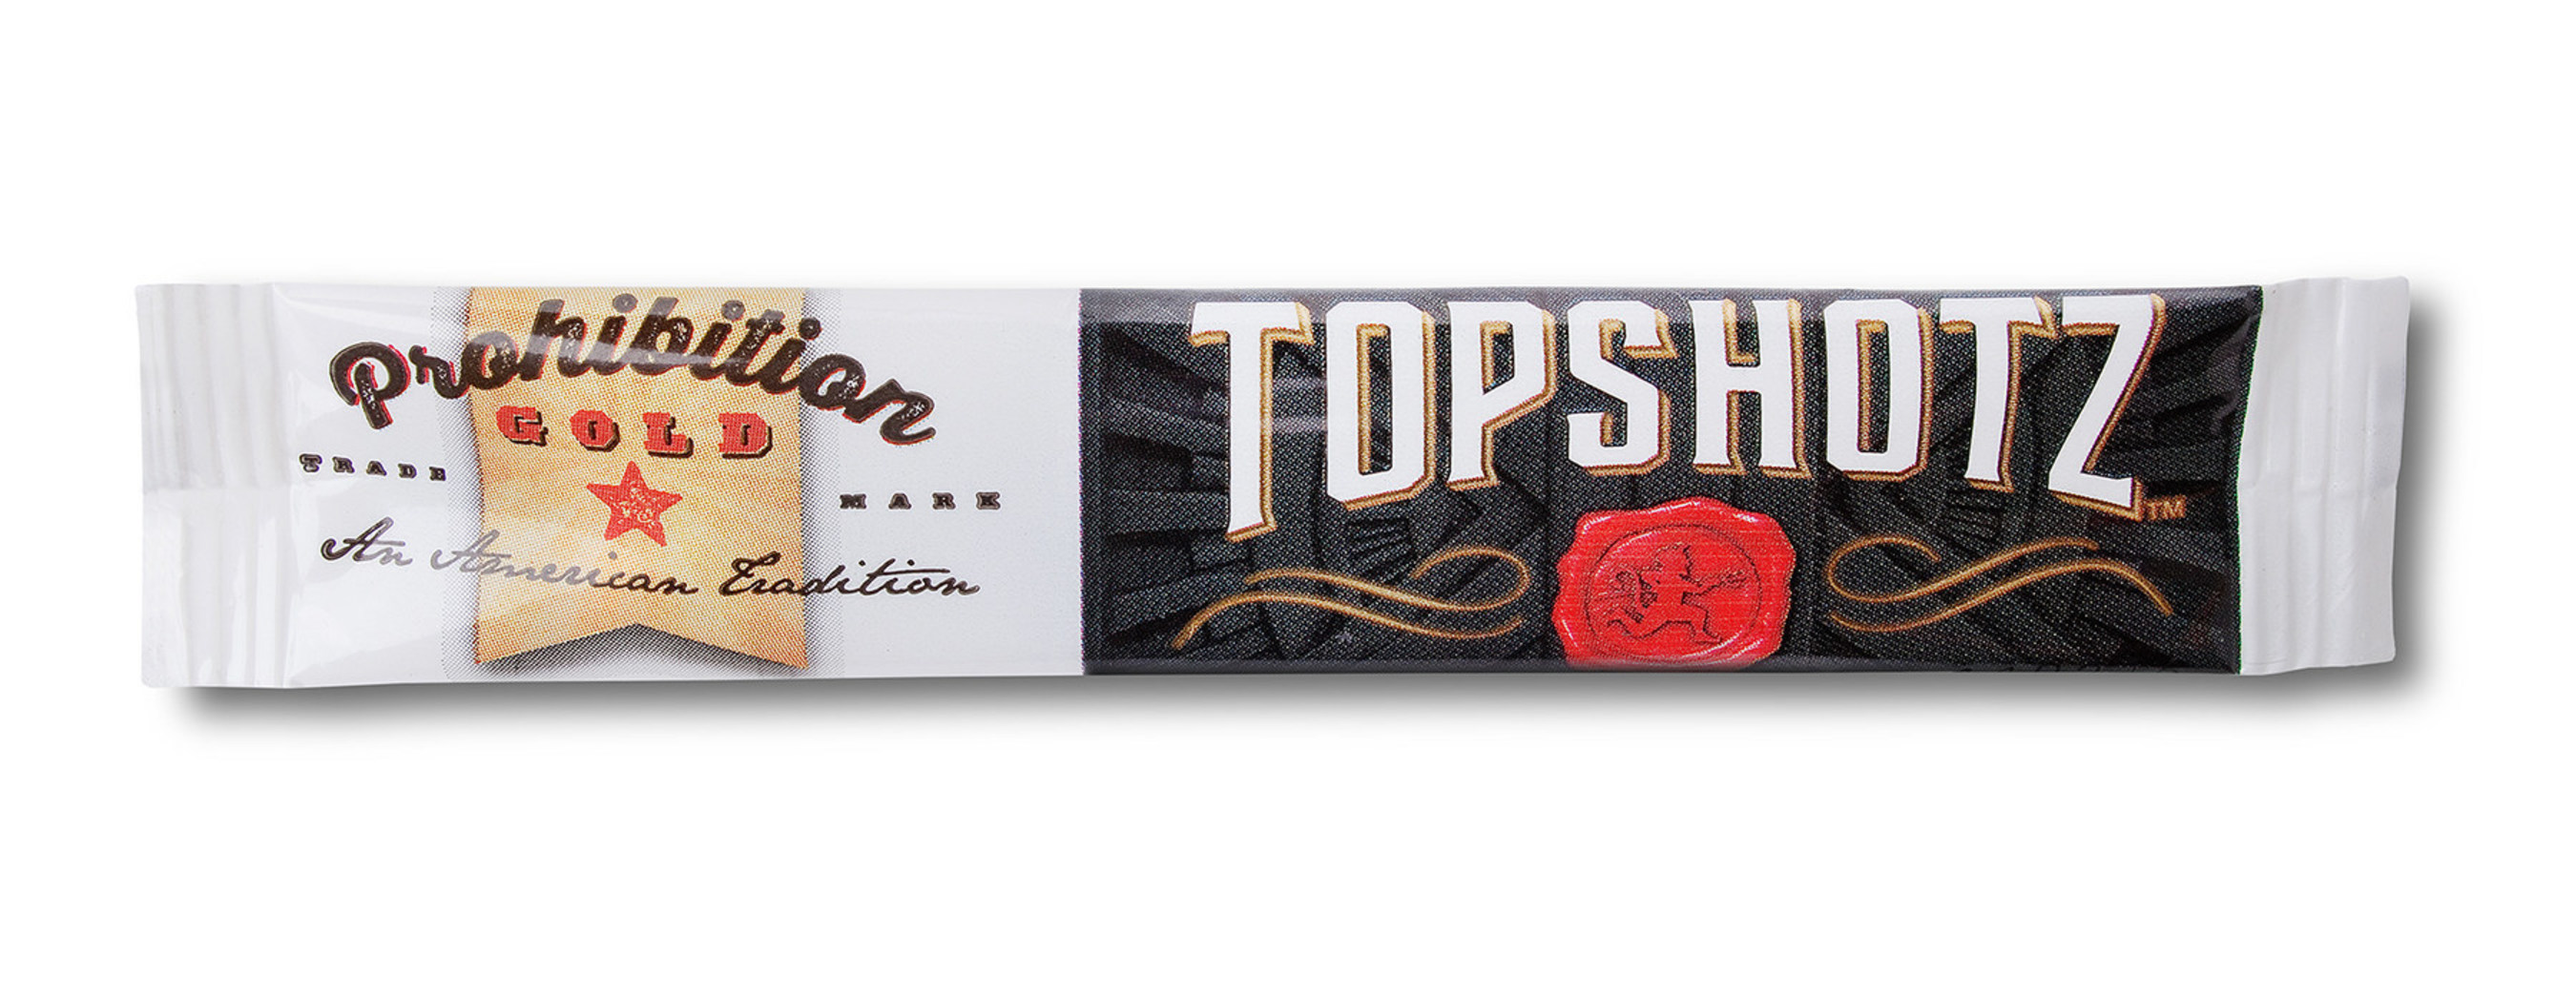 Prohibition Gold's Topshotz single 10mg dose stick packs are similar in size and shape to Starbucks VIA(R) Instant Coffee.